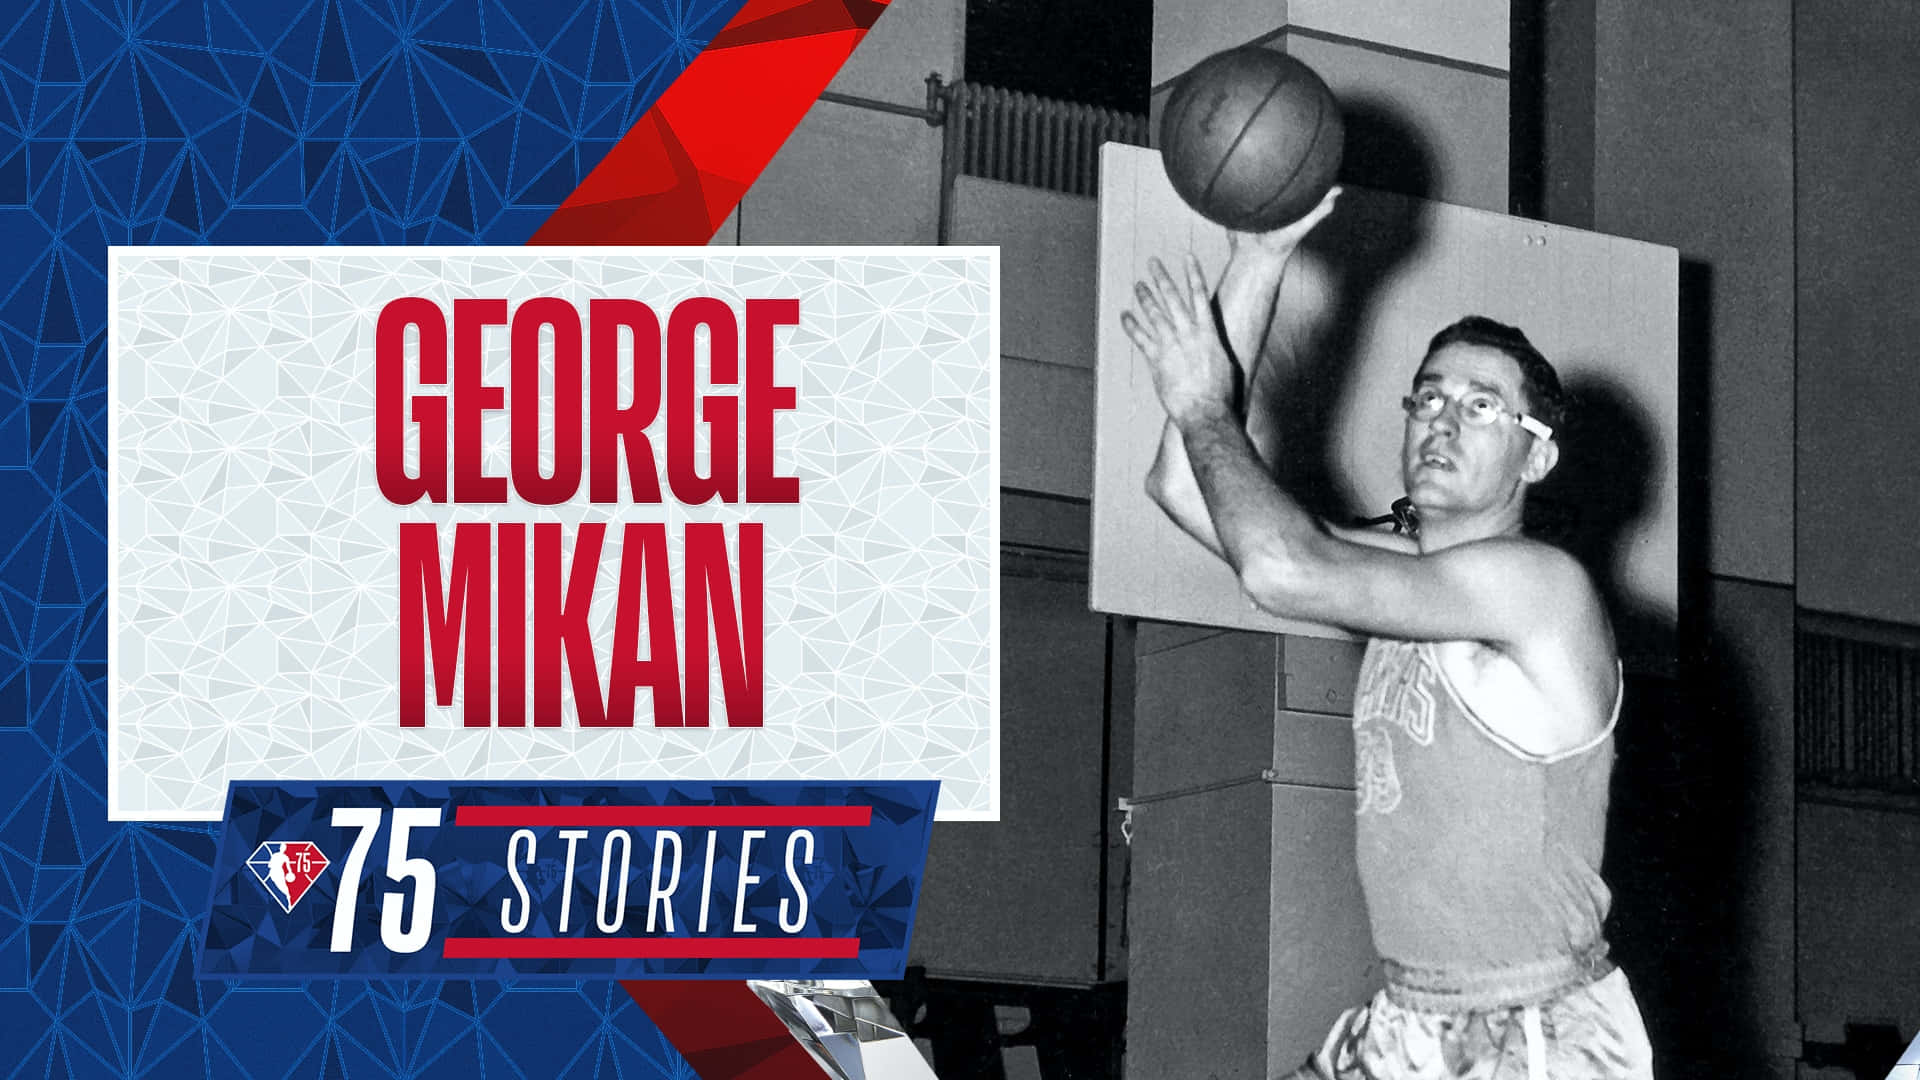 Download George Mikan With Joe Dumars And Stacey Augmon Wallpaper